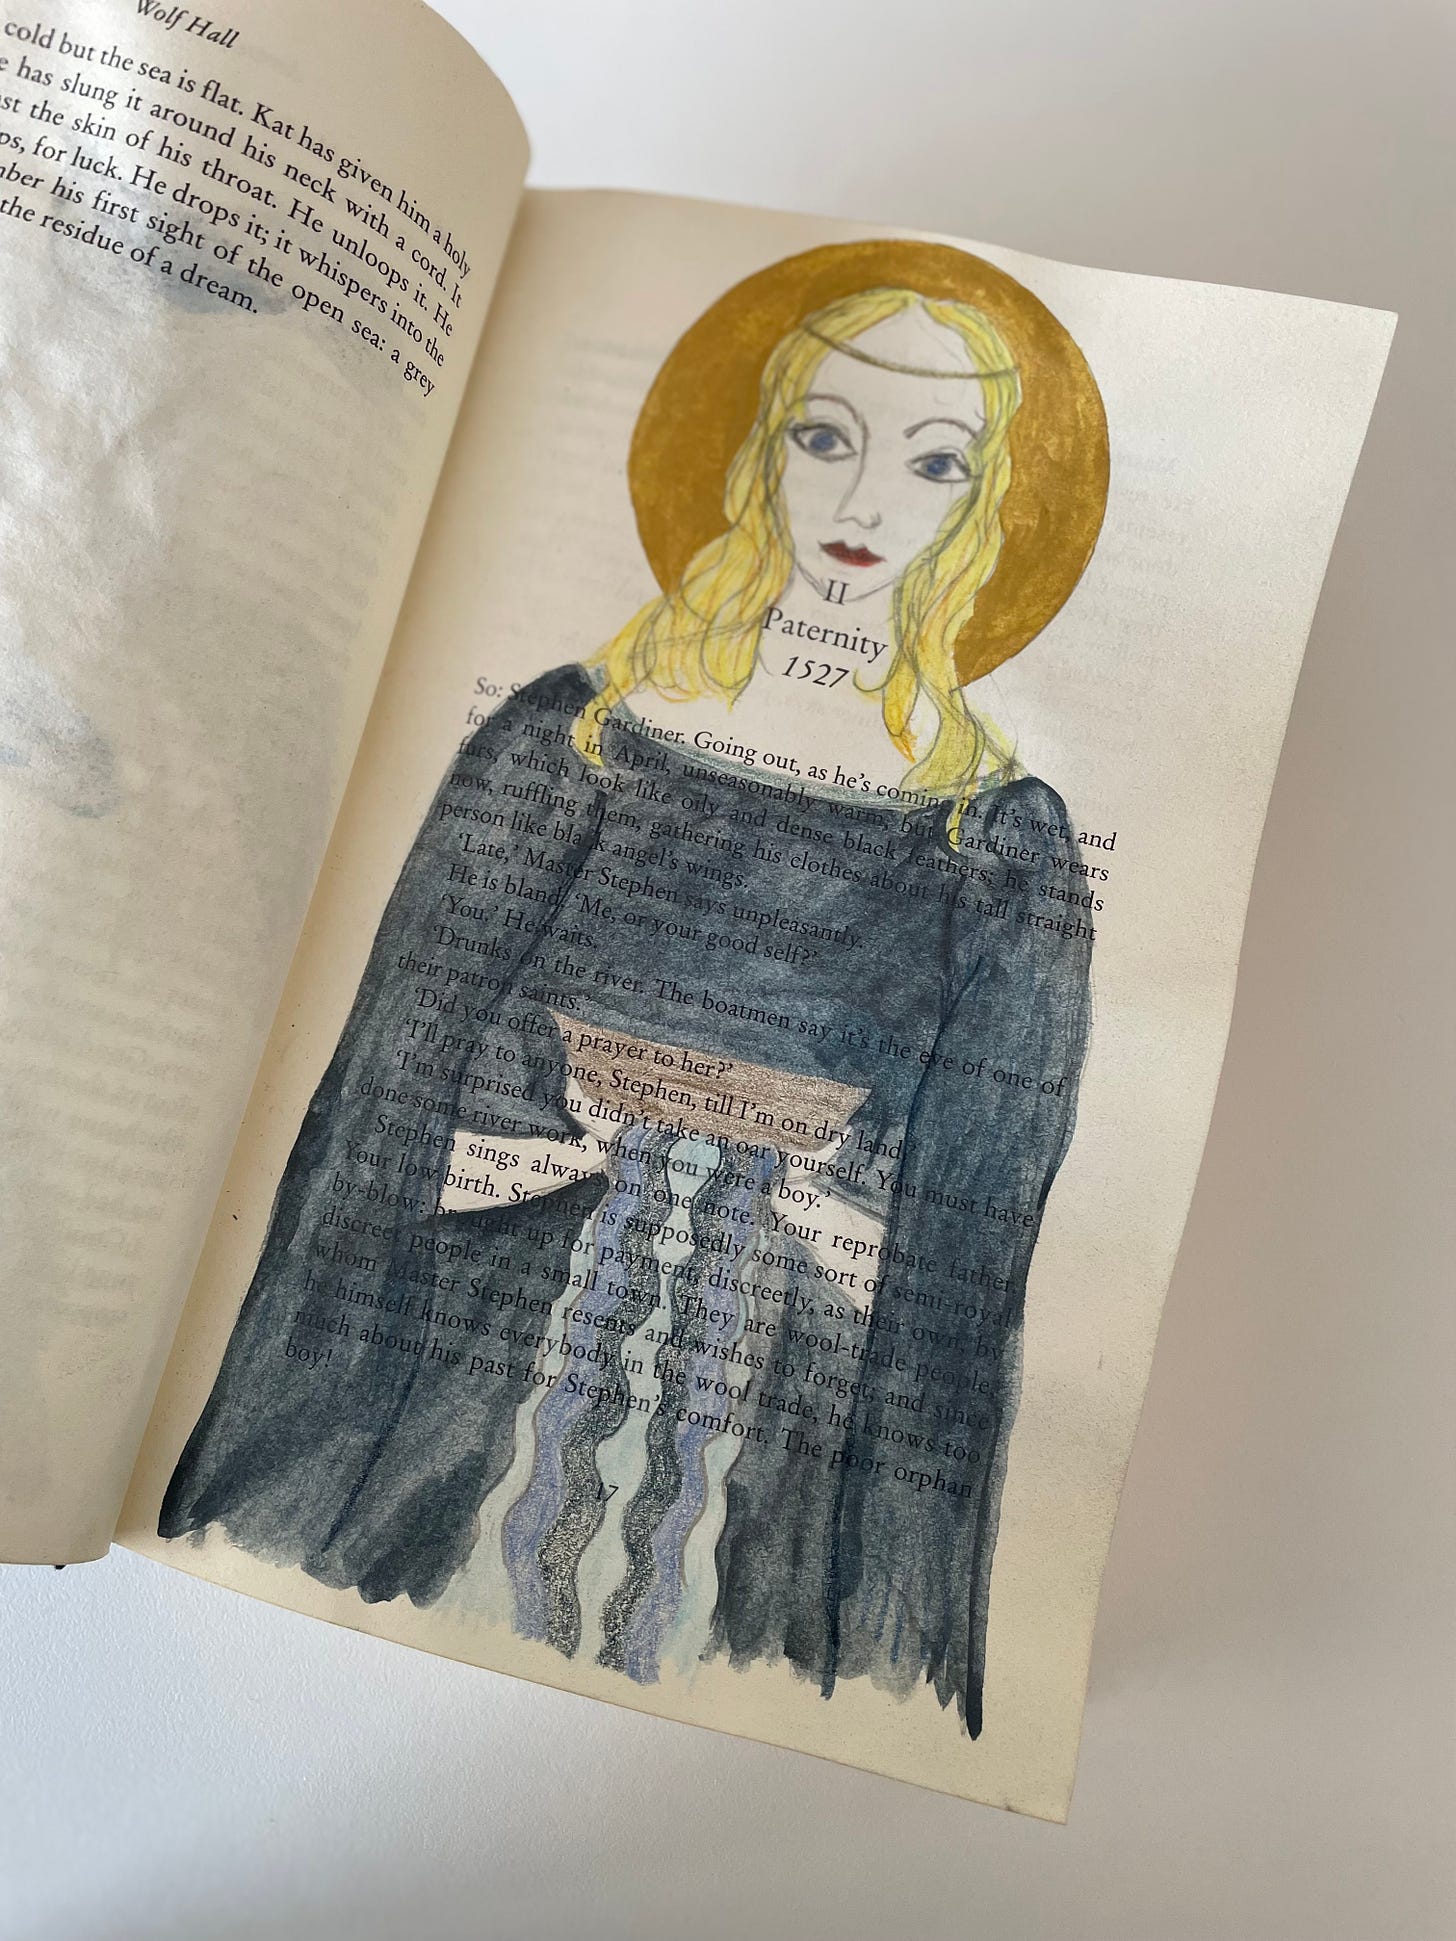 An image of a painted saint holding a boat, painted over the text of a book.